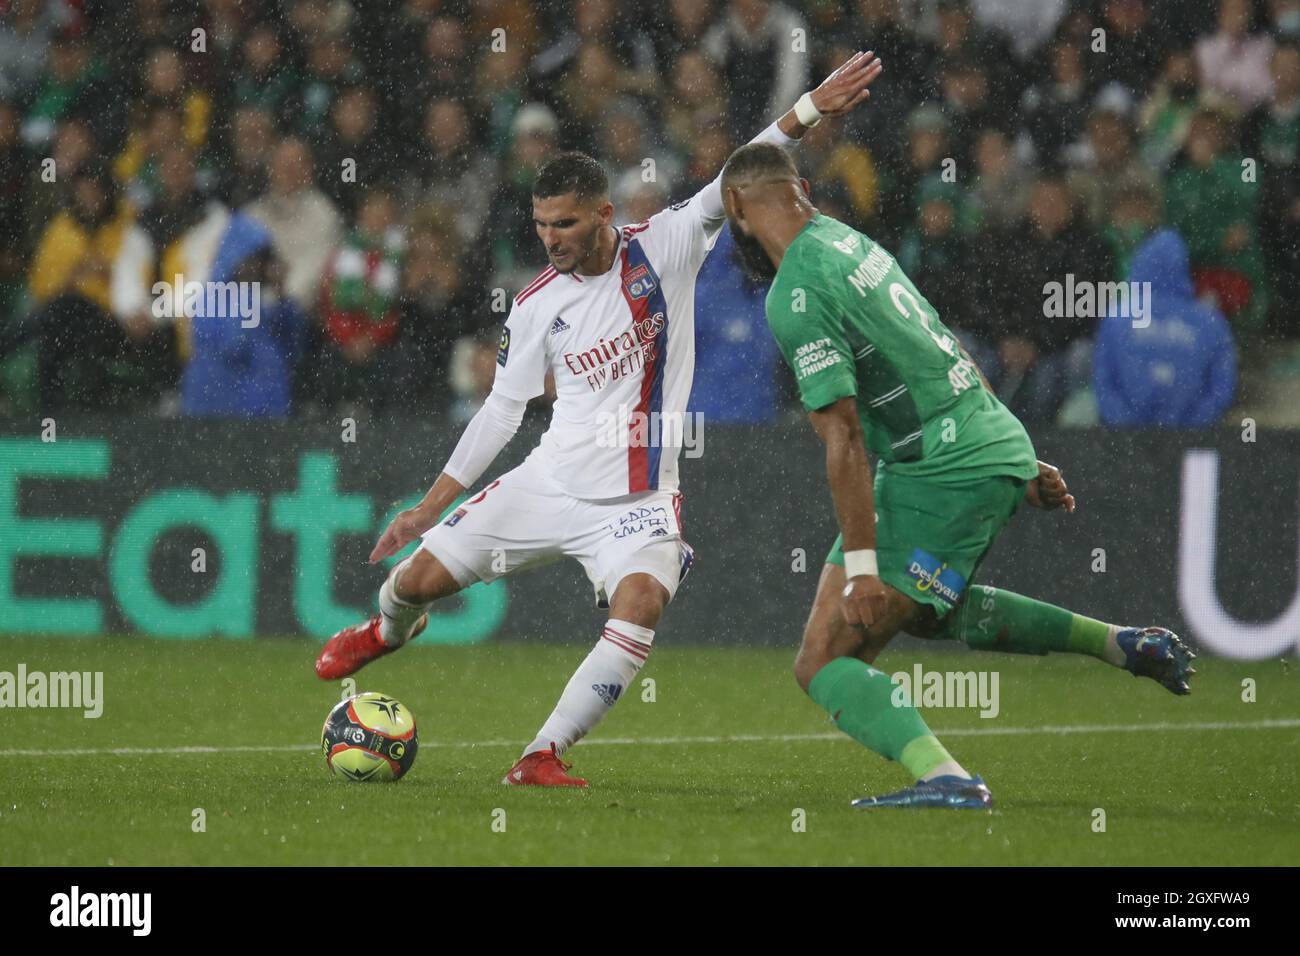 Houssem AOUAR of Lyon score a goal and Harold MOUKOUDI of Saint Etienne  during the French championship Ligue 1 football match between AS Saint- Etienne and Olympique Lyonnais on October 3, 2021 at